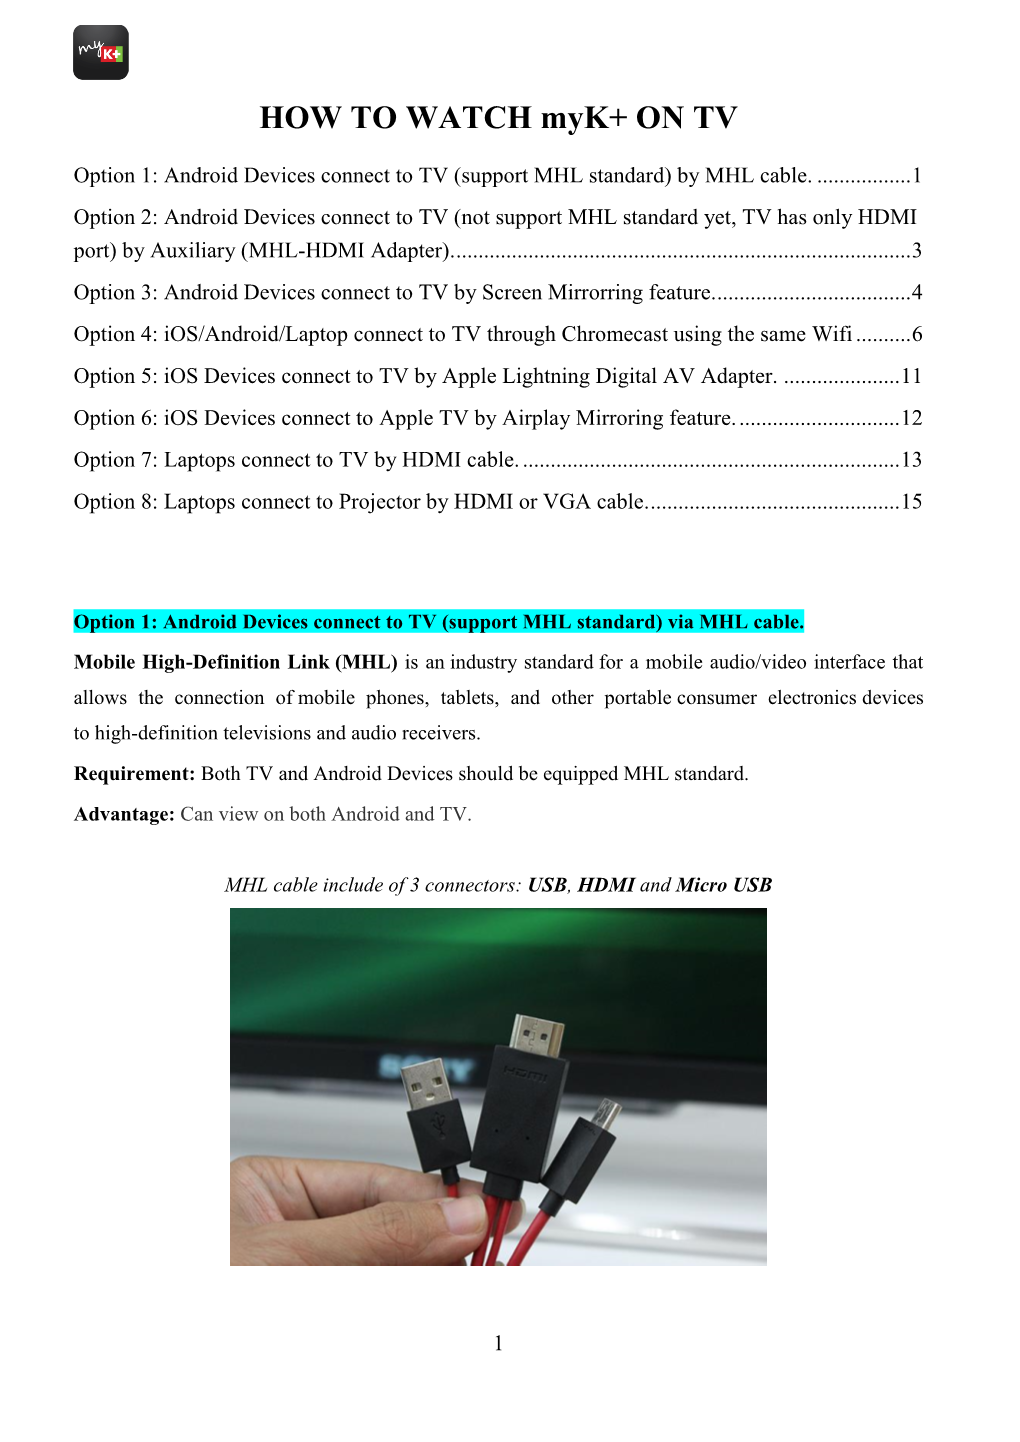 Connect to TV (Support MHL Standard) by MHL Cable